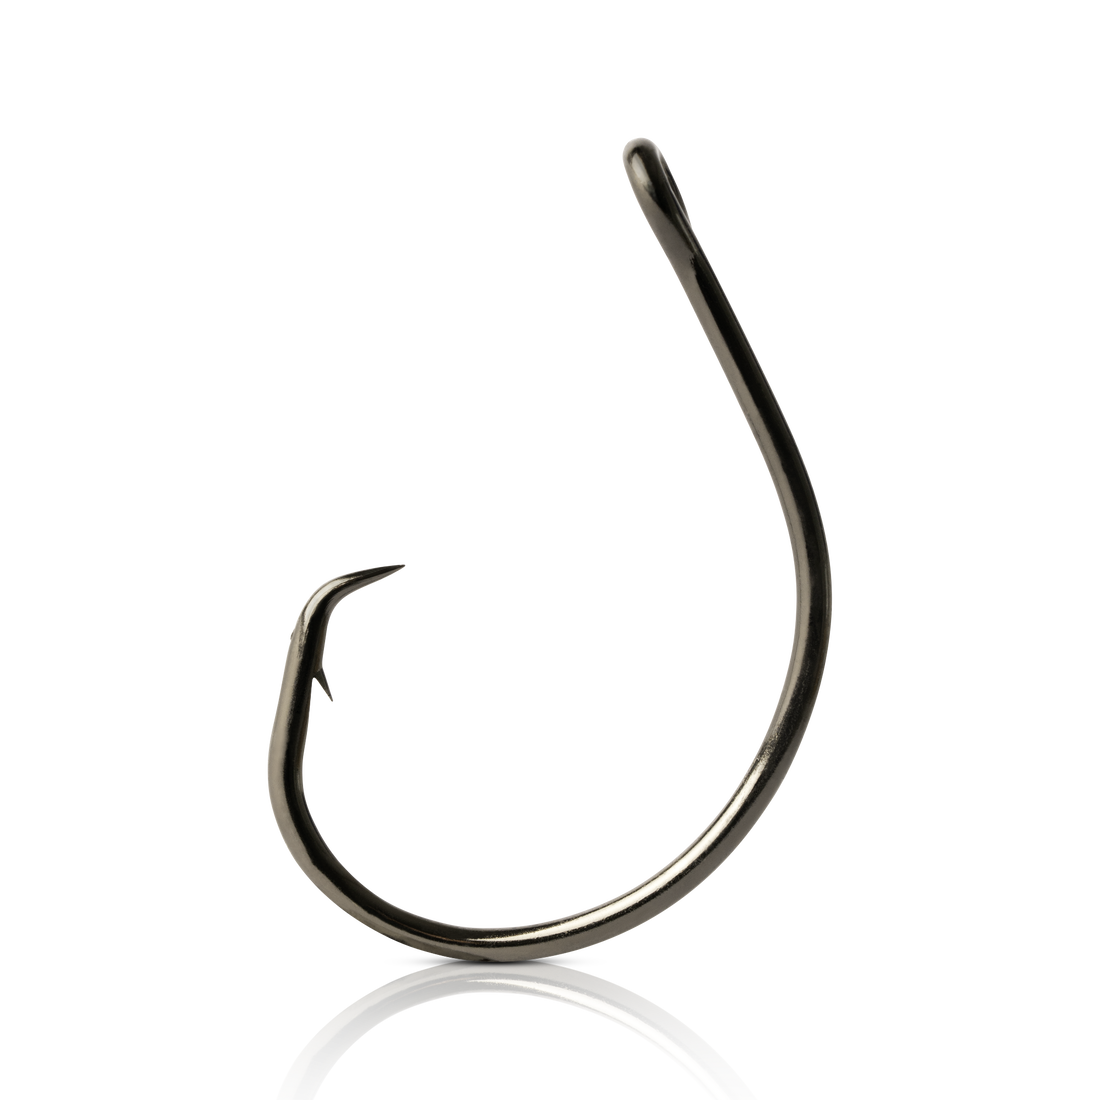 Mustad Demon Perfect Inline Circle 3X Strong Hook - 39951NP